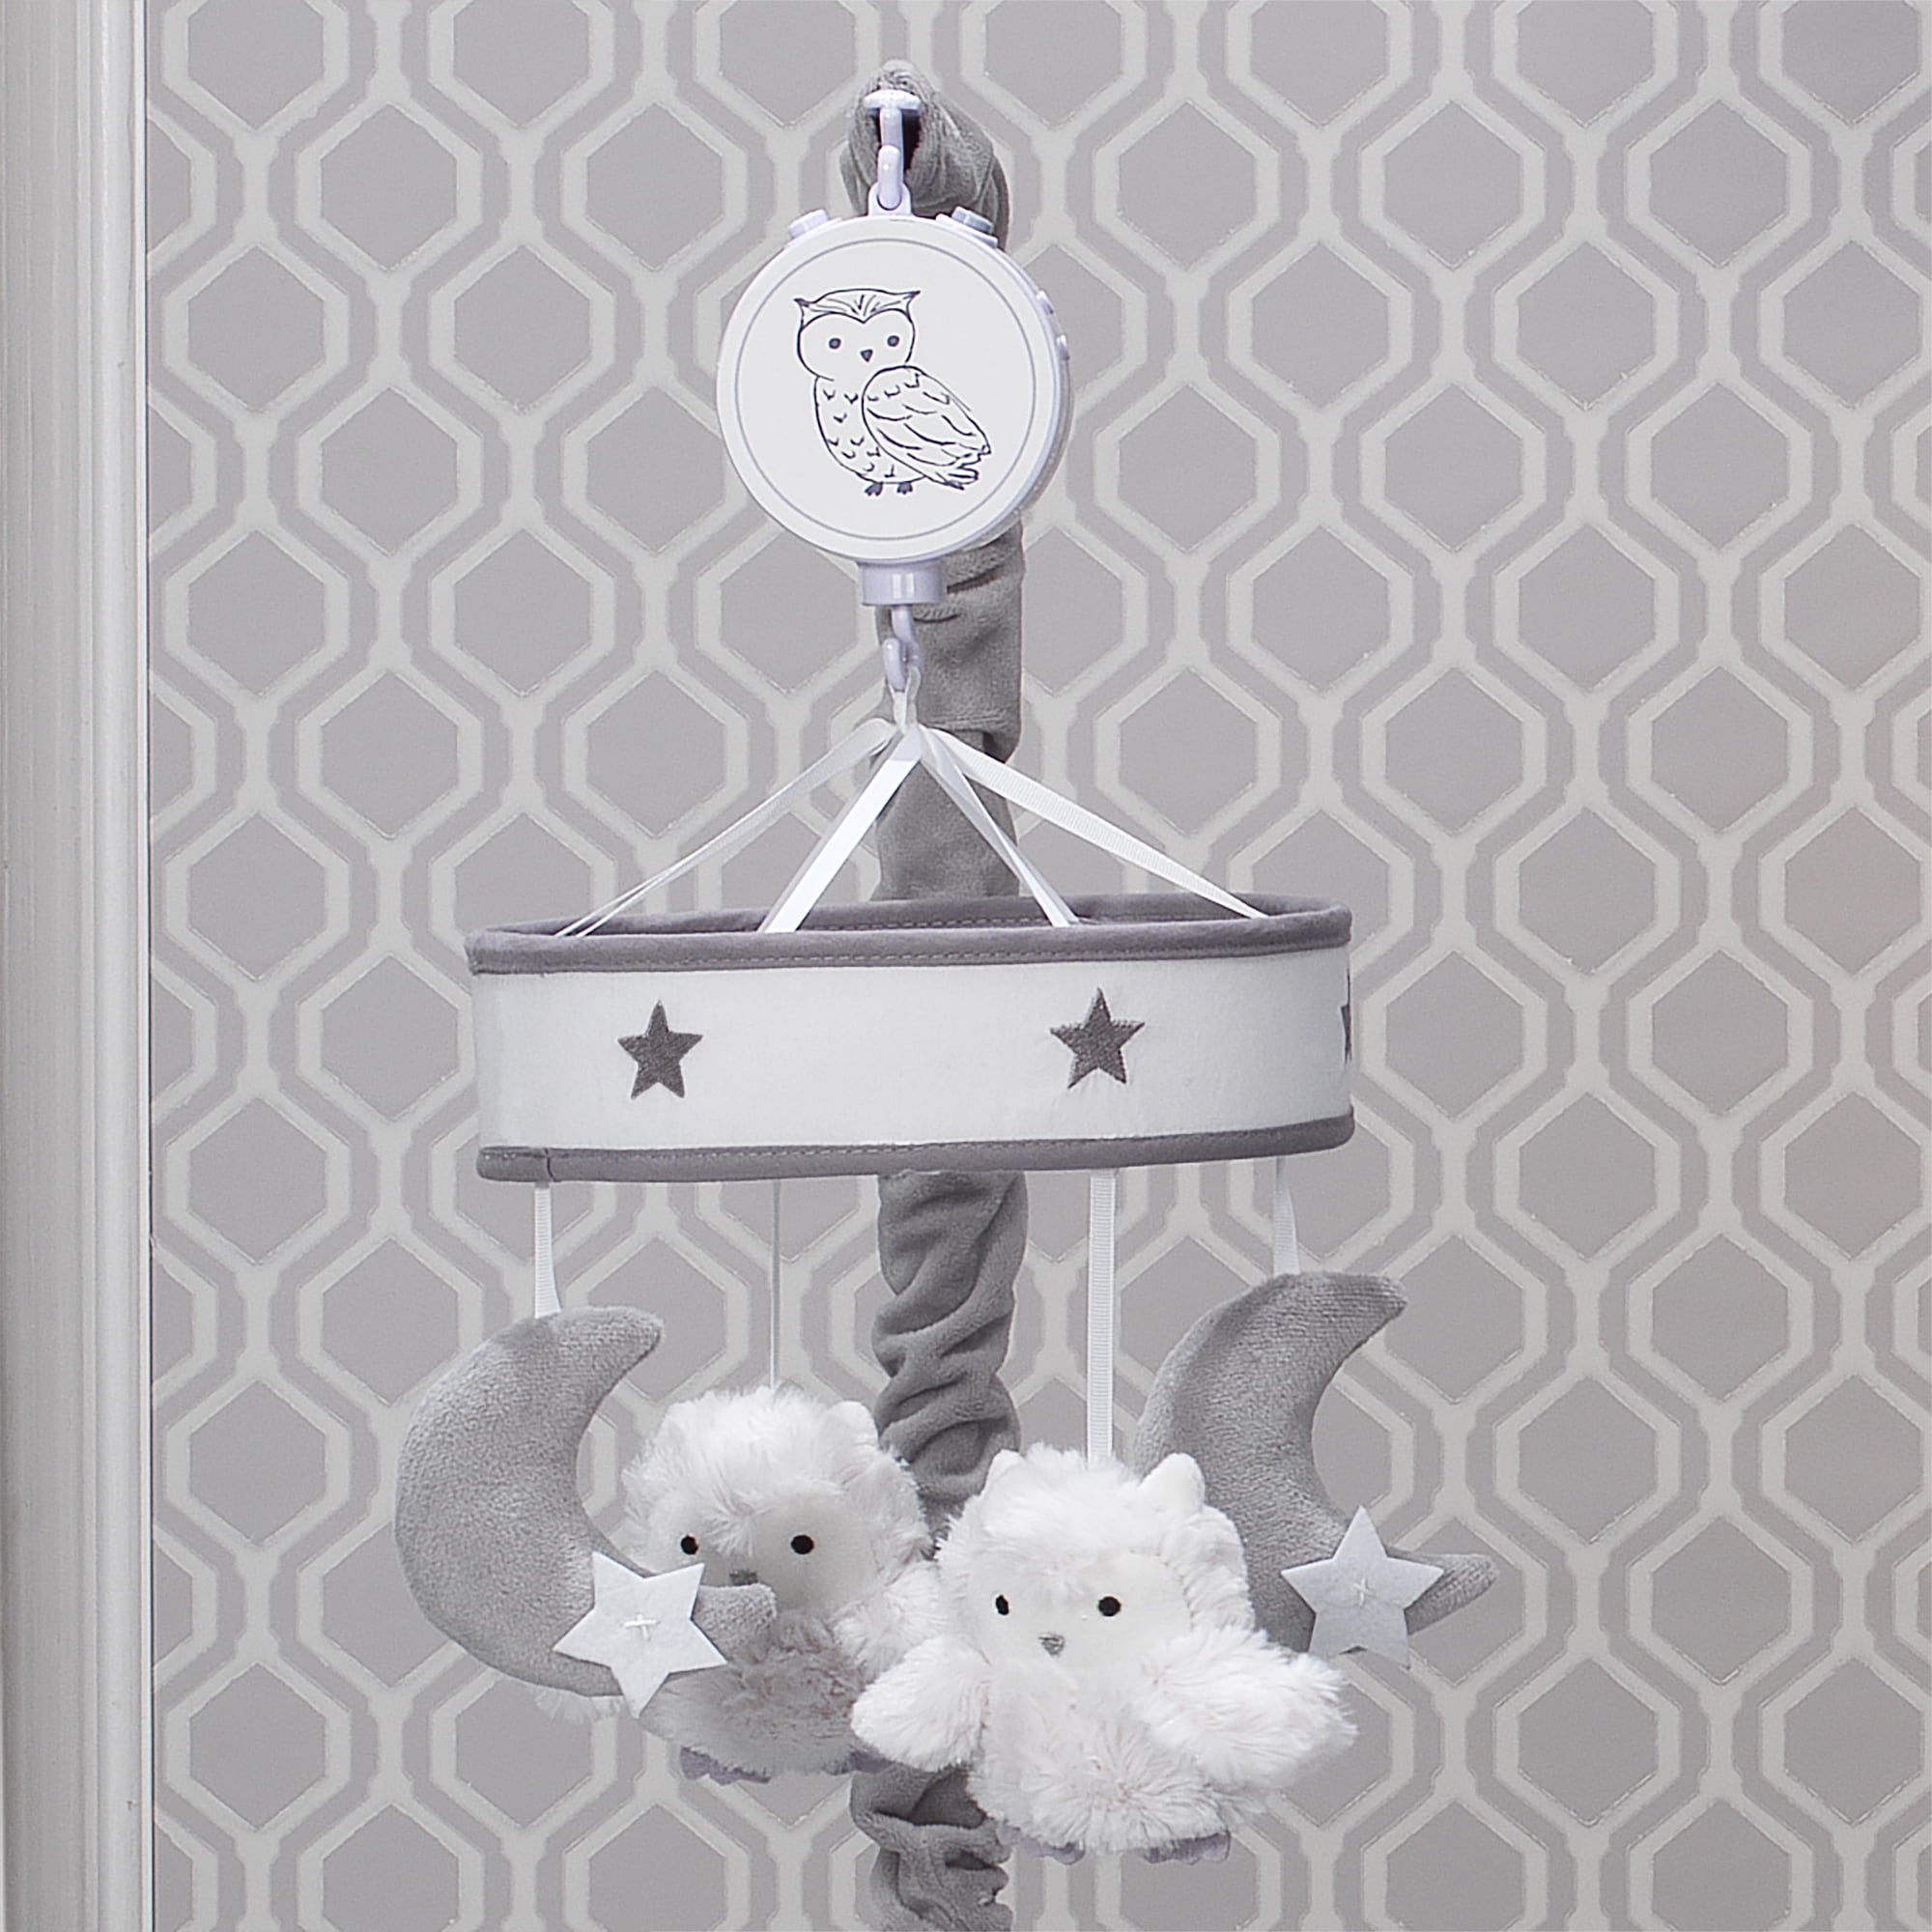 Lambs & Ivy Luna Gray/White Owls and Moons Musical Baby Crib Mobile 1 Count Pack of 1 